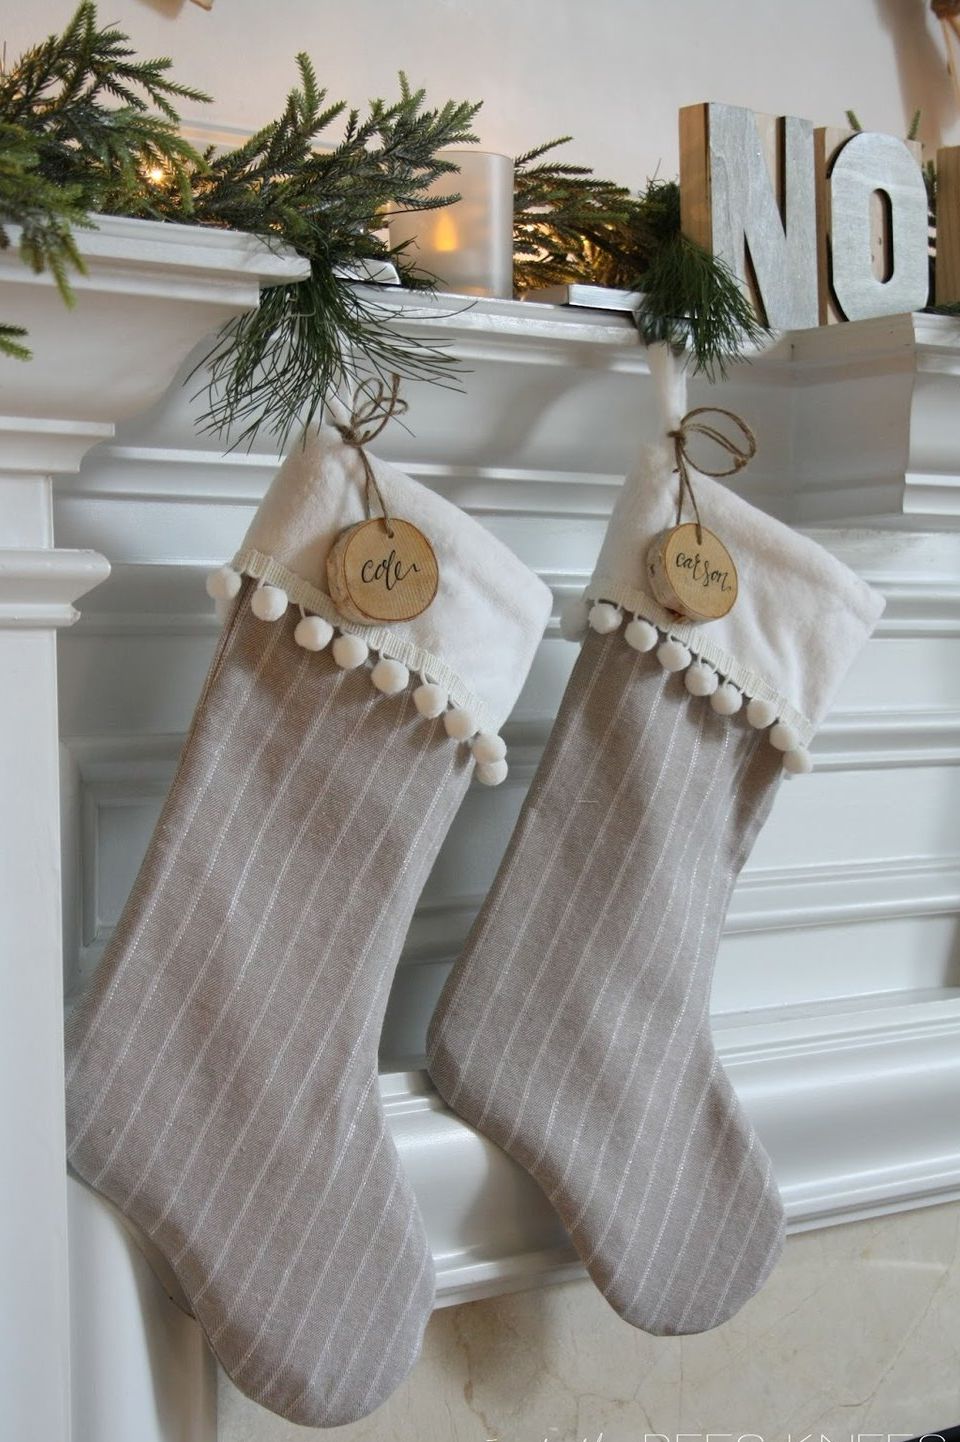  Imperial Home Christmas Stockings, Cute Holiday Decor